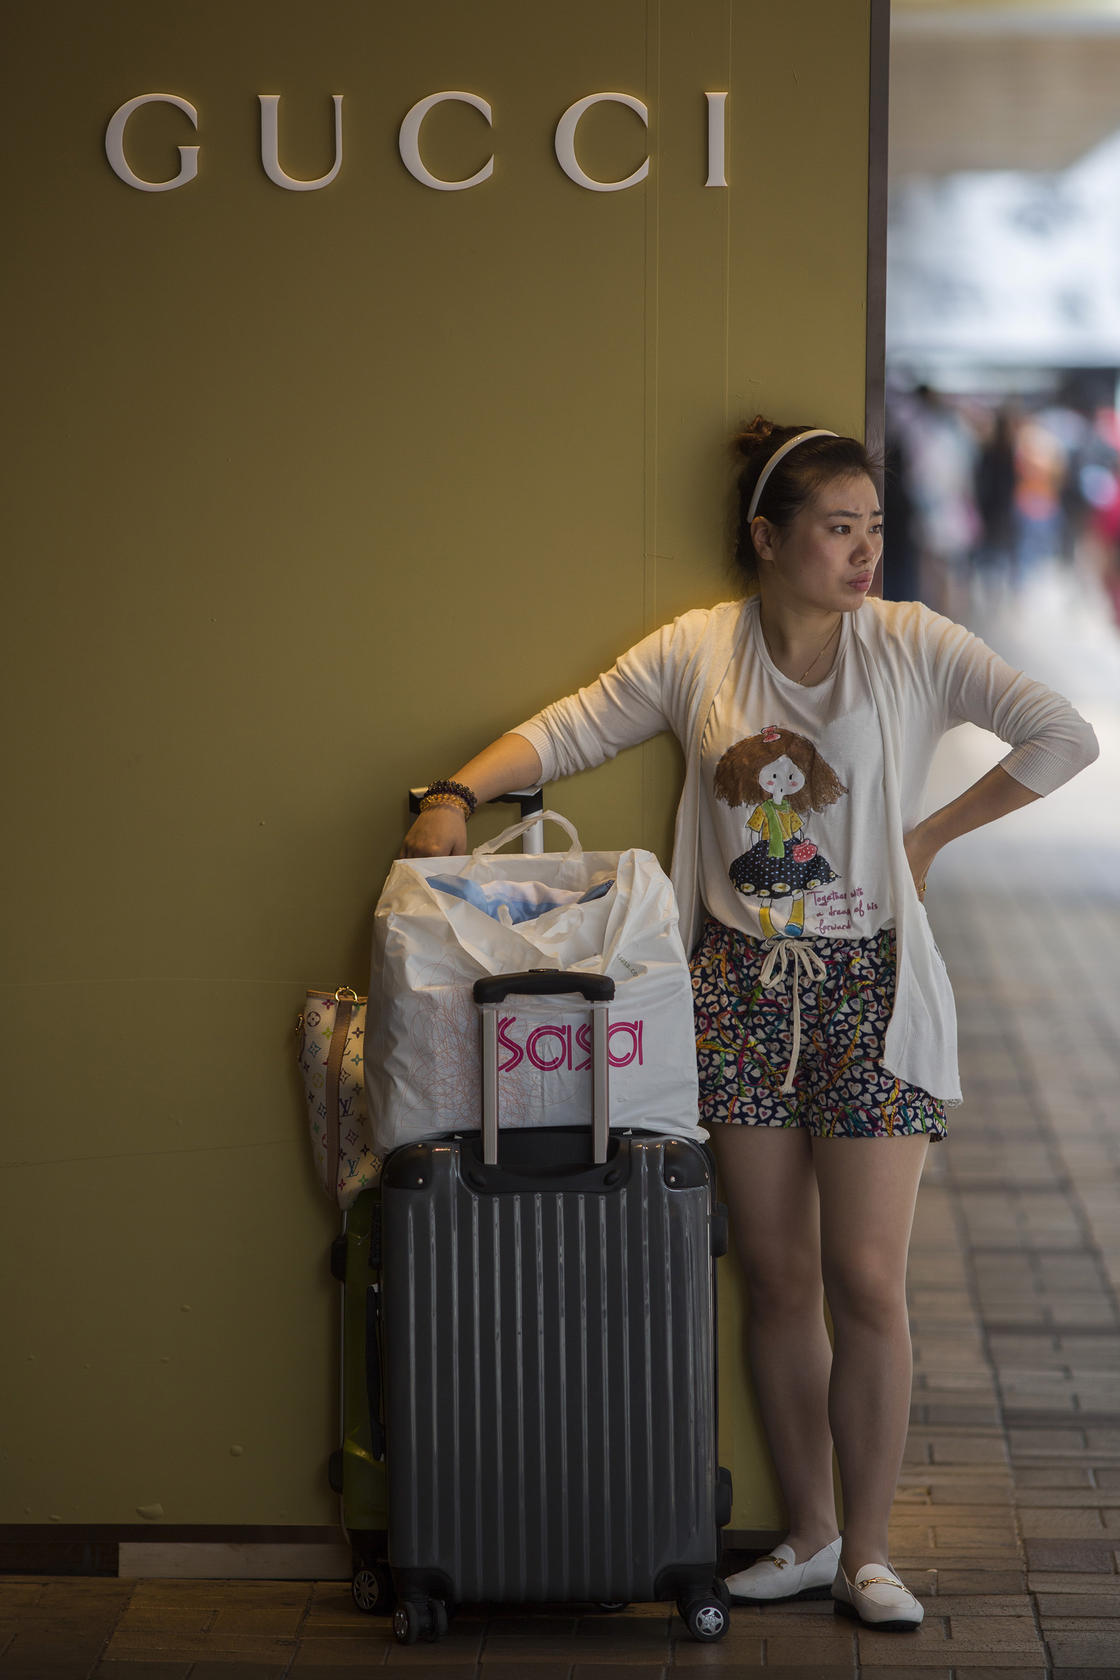 Mainlanders and their luxury booty have transformed the face of shopping districts such as Tsim Sha Tsui. Photo: Bloomberg